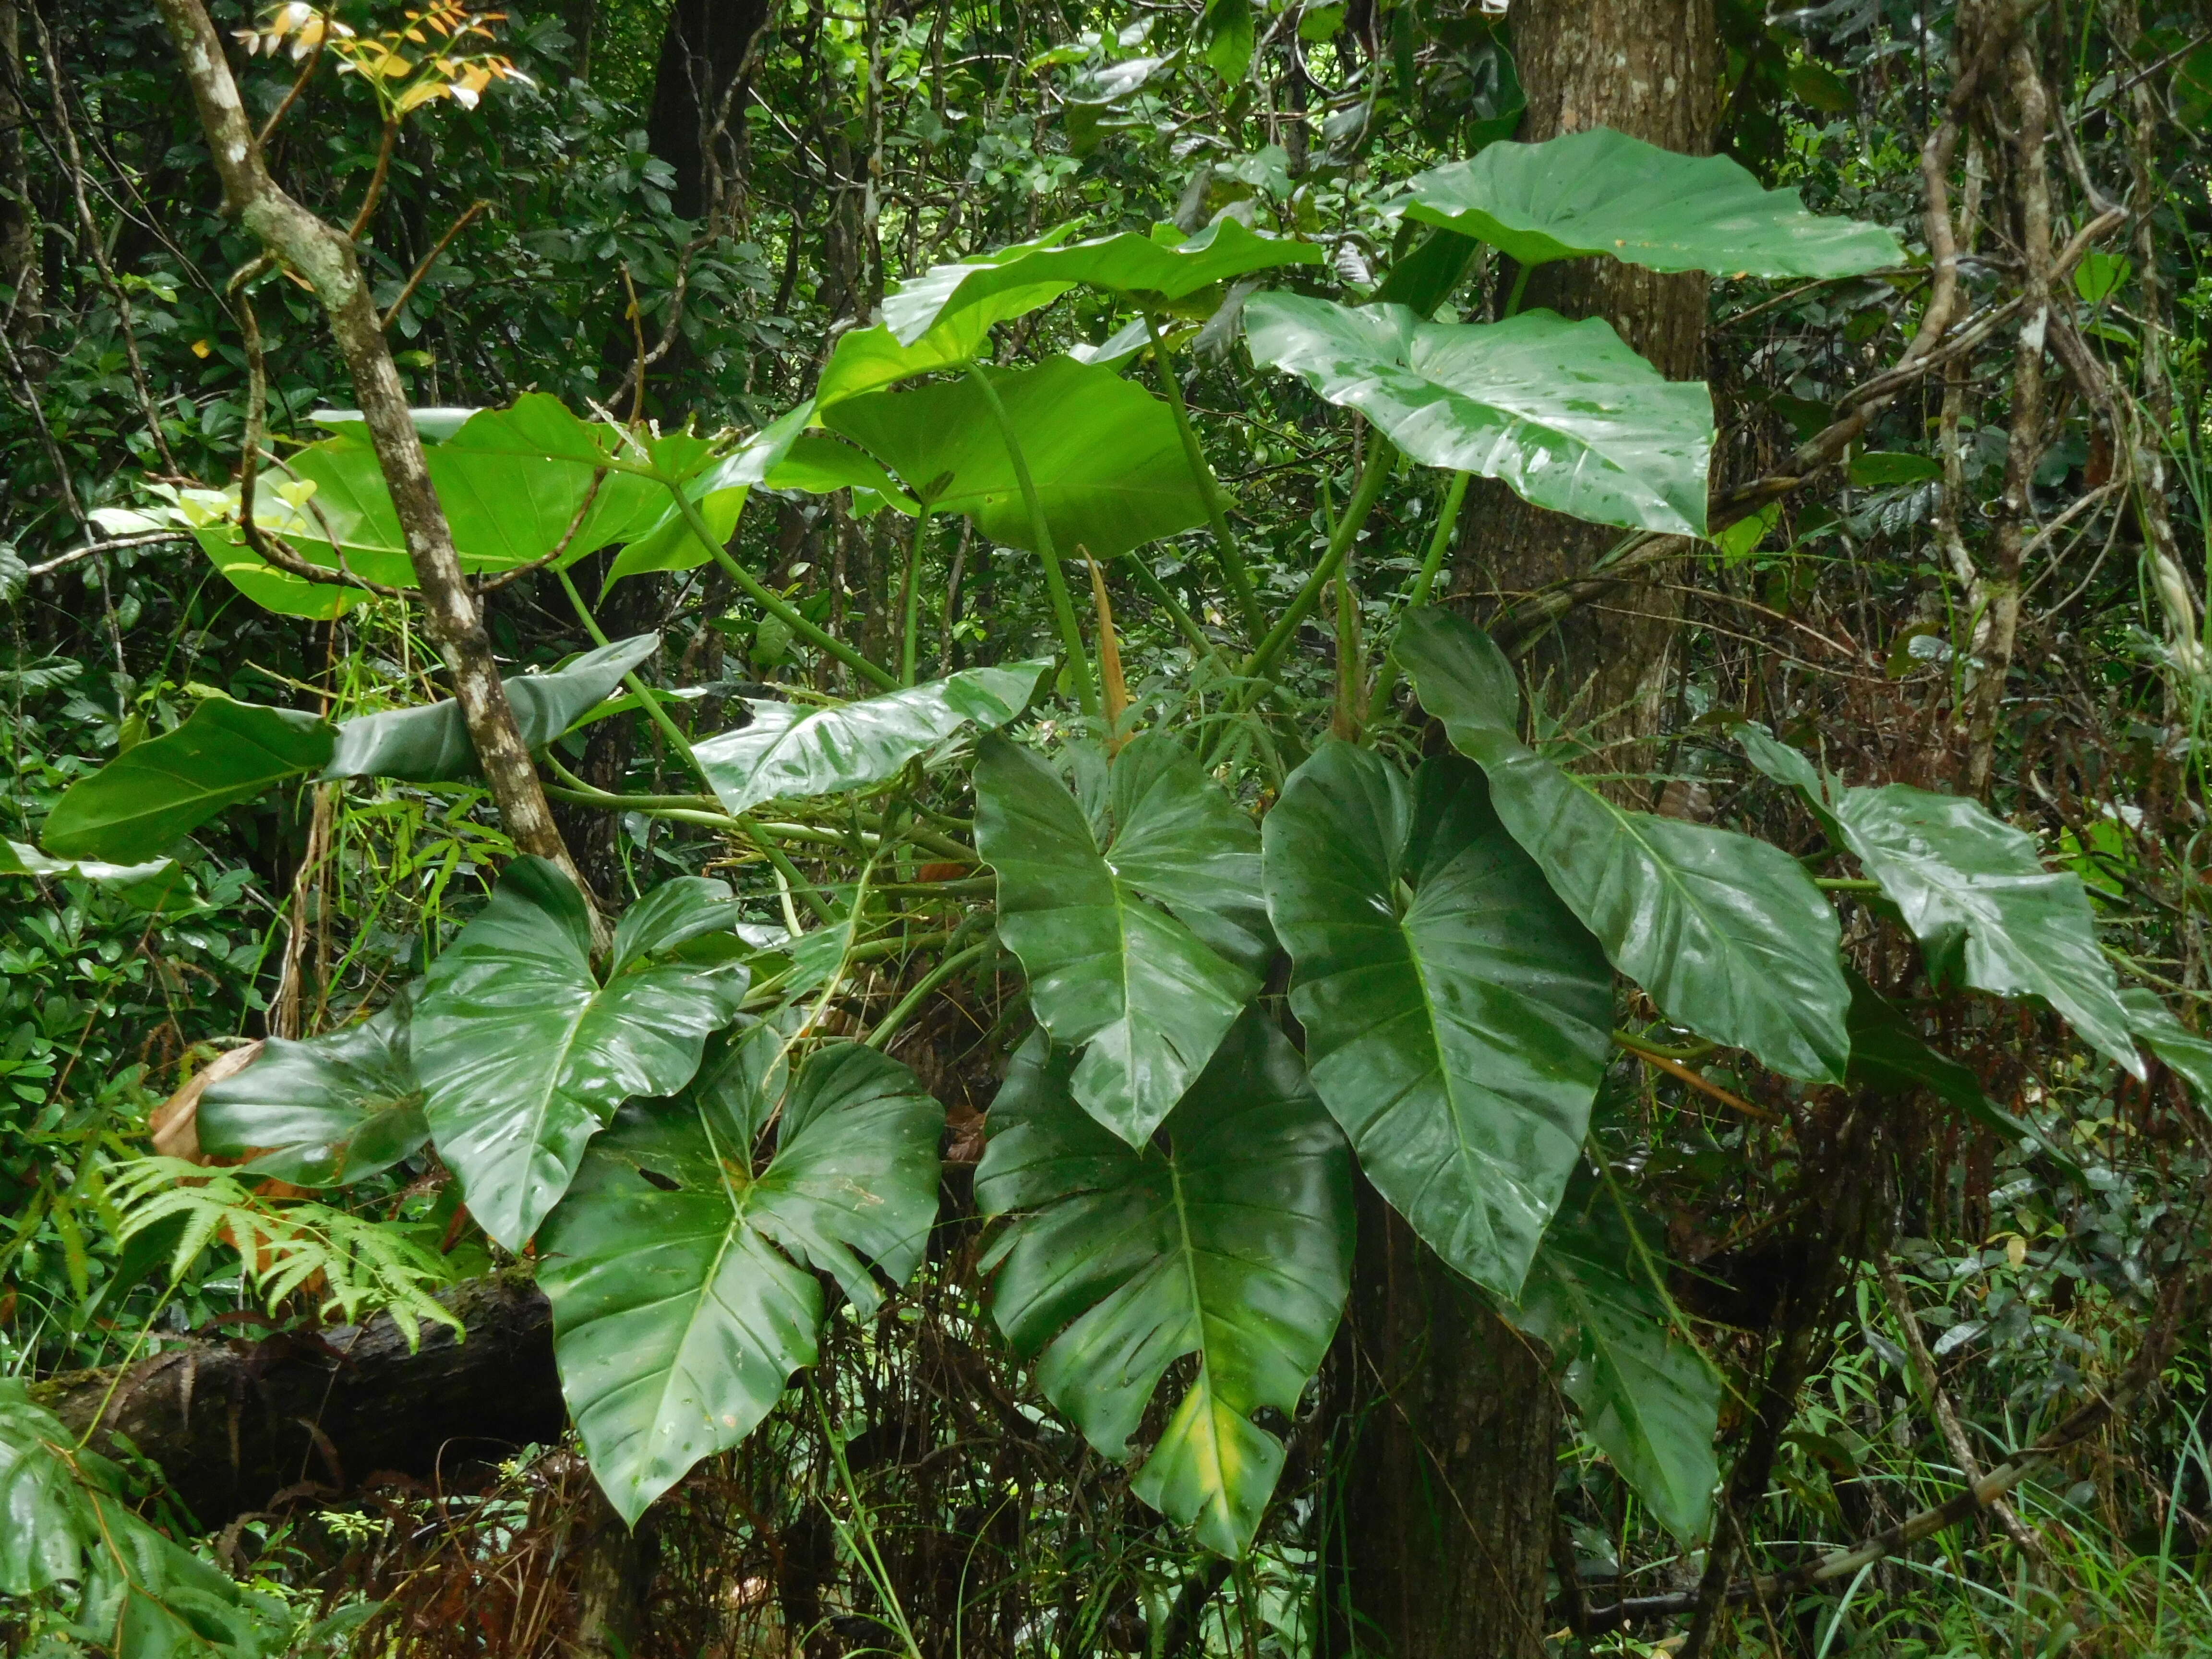 Image of giant philodendron